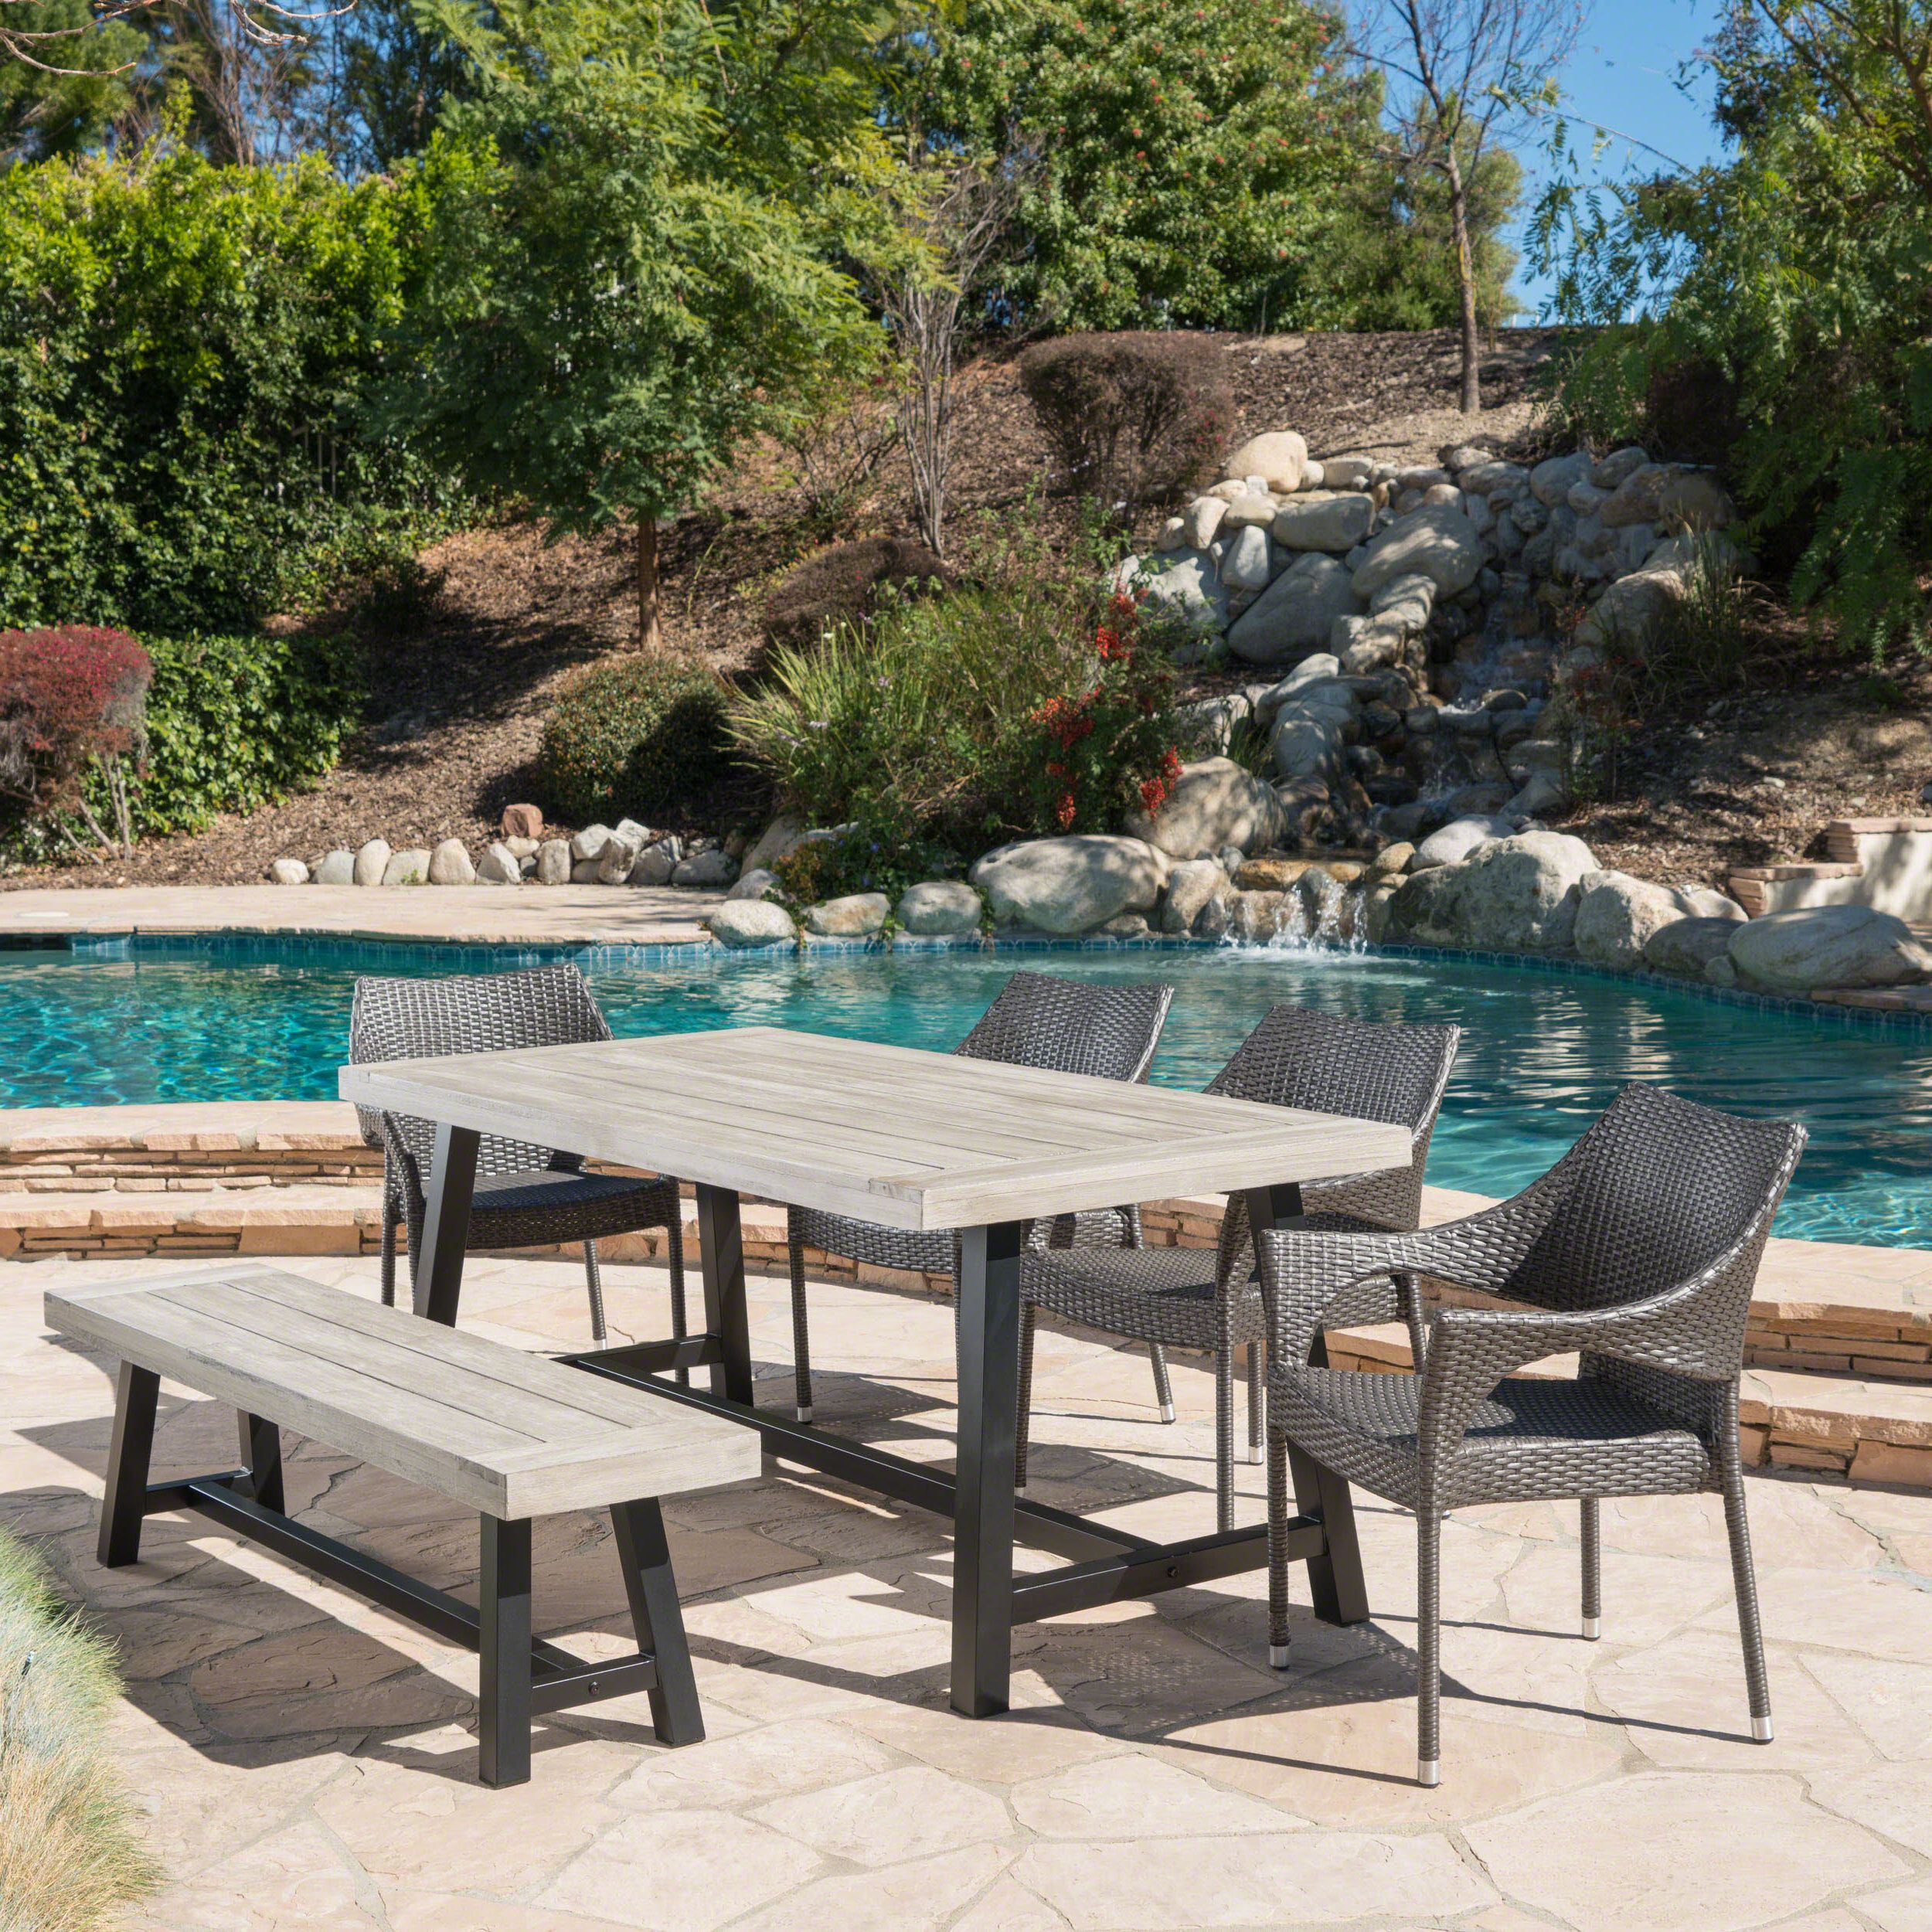 Jimmy Outdoor 6 Piece Wicker Dining Set With Acacia Wood Table And Within Current Black And Gray Outdoor Table And Chair Sets (View 14 of 15)